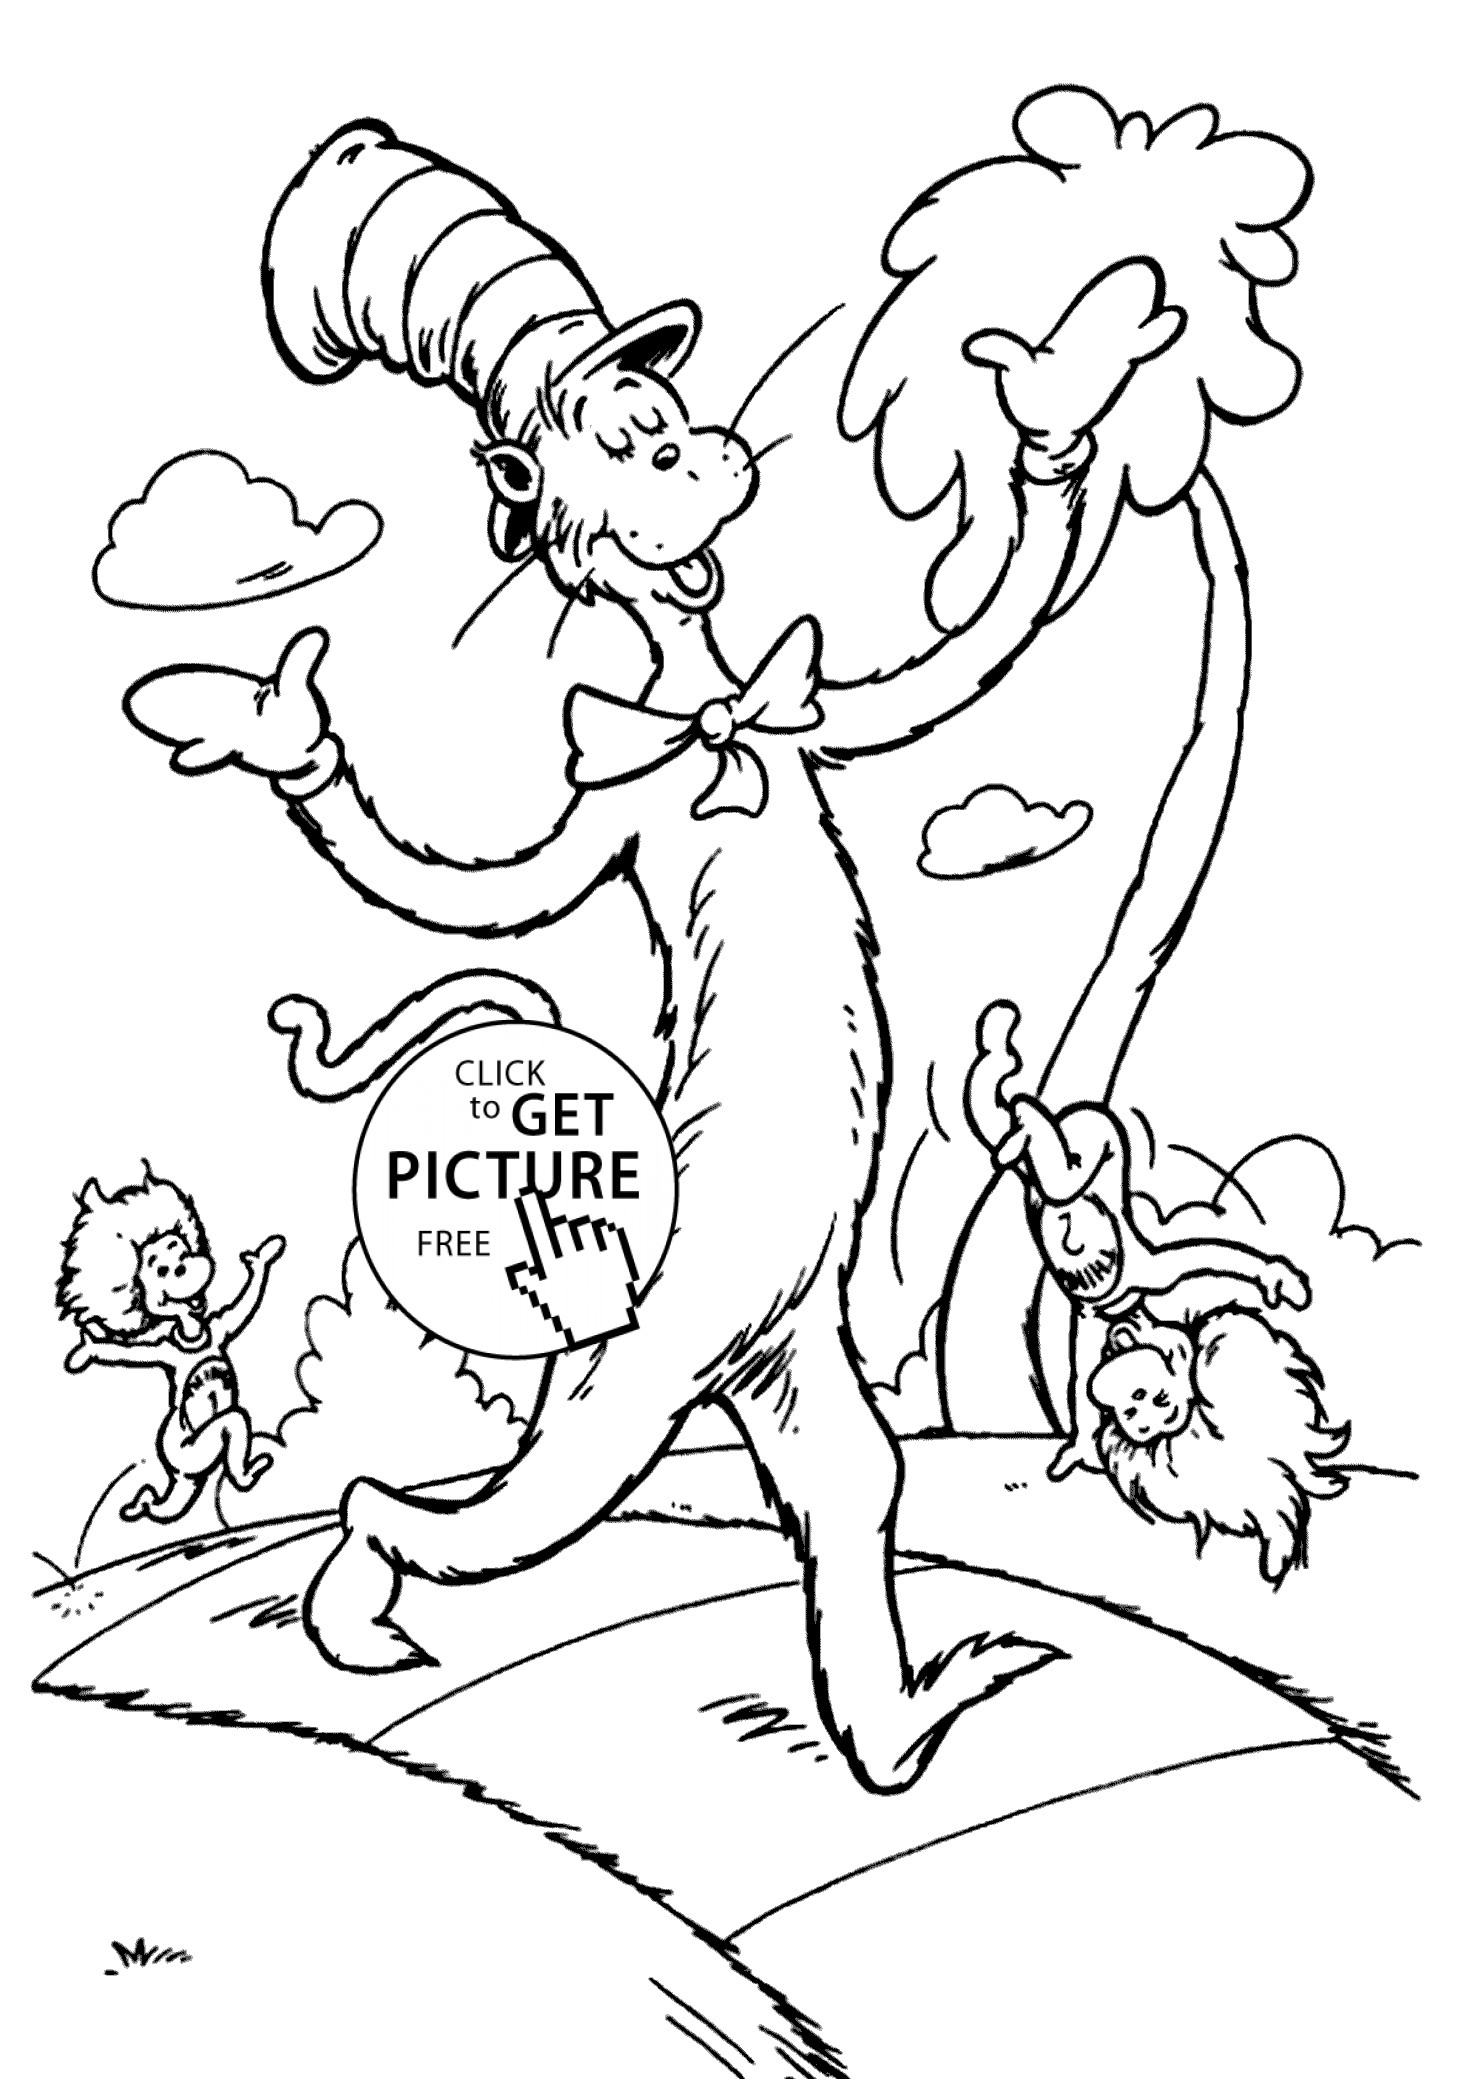 Dr Seuss Coloring Pages For Kids
 The Сat in the hat and promenade coloring pages for kids